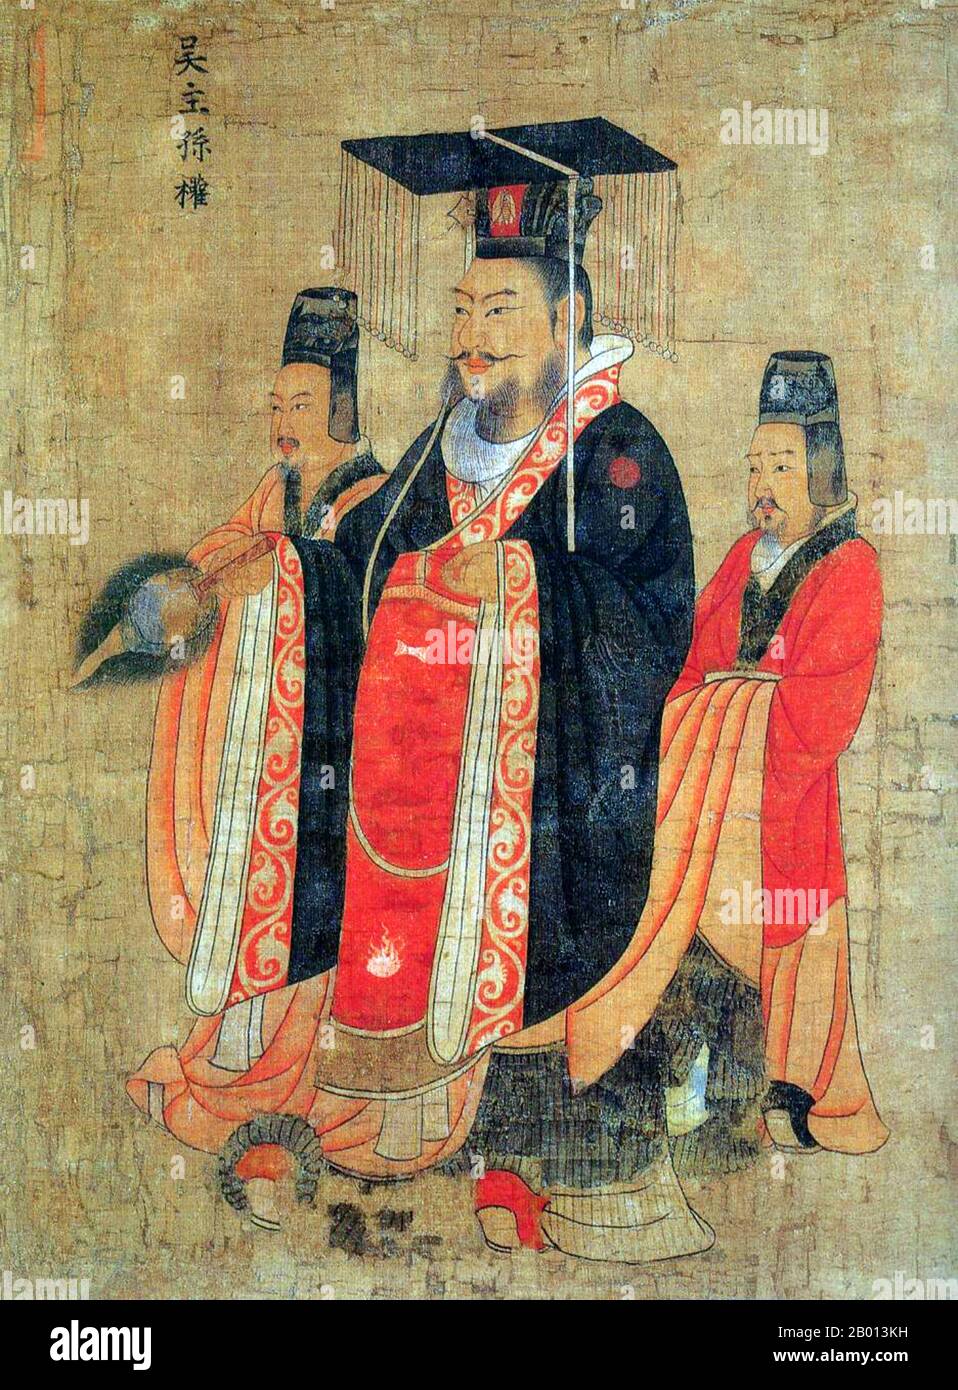 China: Emperor Da of Eastern Wu (182–252). Handscroll painting from the 'Thirteen Emperors Scroll' by Tang Dynasty court painter Yan Liben (600-673), 7th century.  Sun Quan (182–252), son of Sun Jian, formally Emperor Da of Wu, was the founder of Eastern Wu during the Three Kingdoms period in China. He ruled from 222 to 229 as King of Wu and from 229 to 252 as Emperor of Wu. Stock Photo